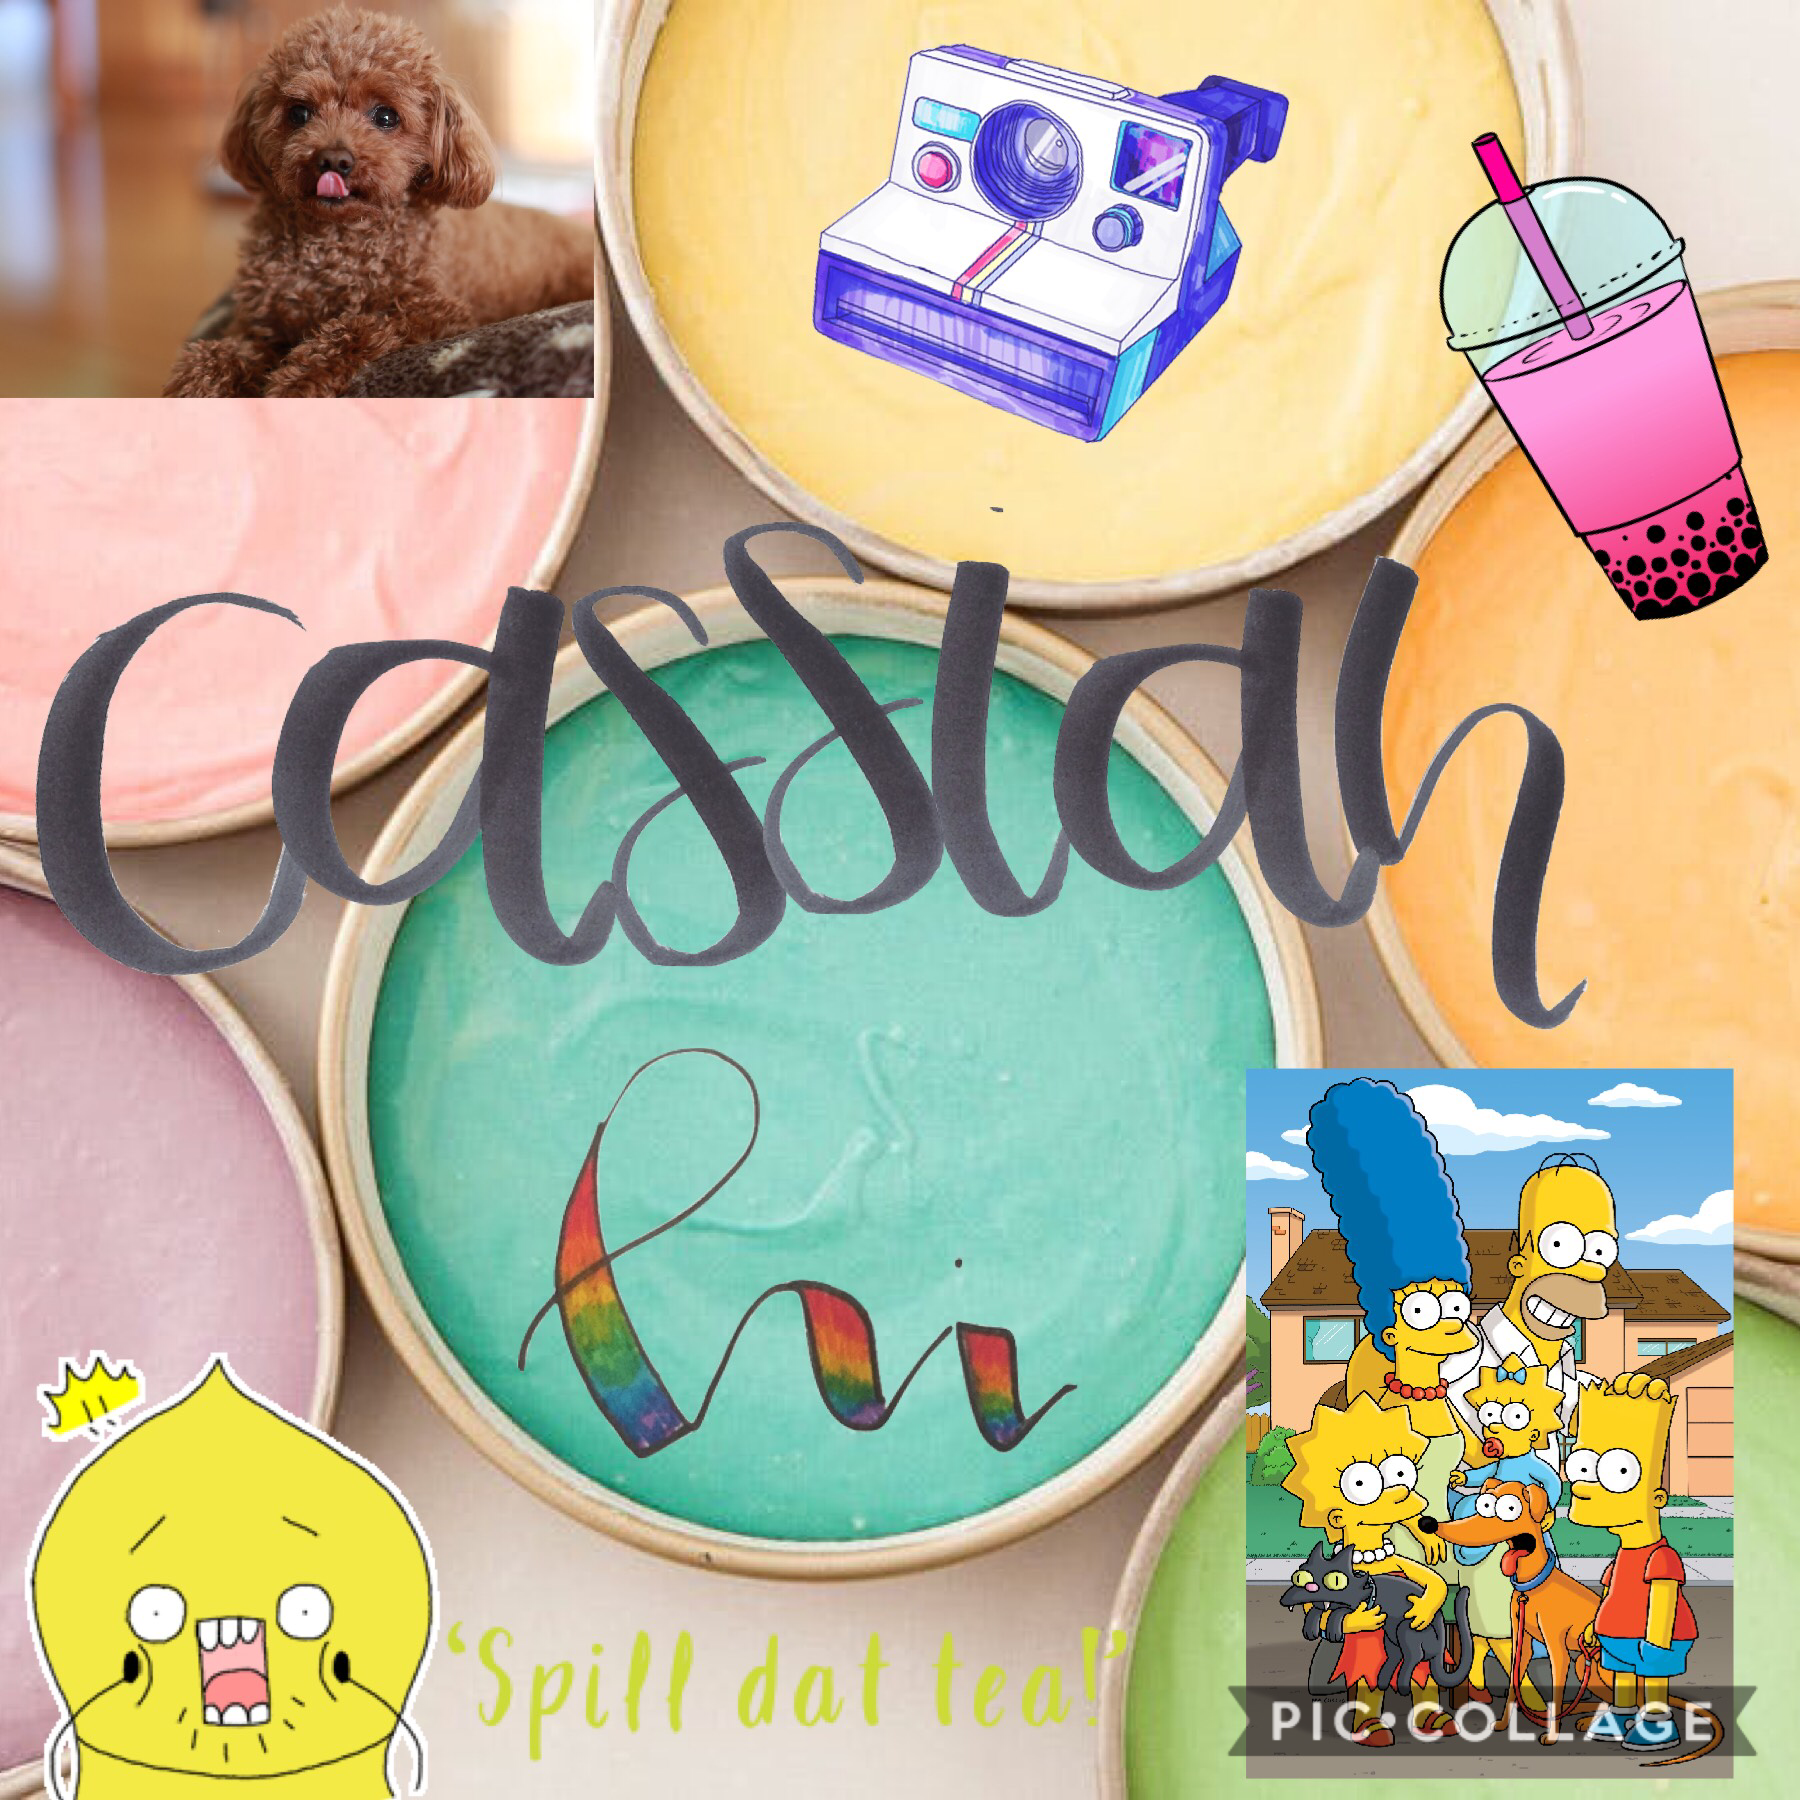 Cassiah... comment if u want a collage and also follow meh if u haven’t!